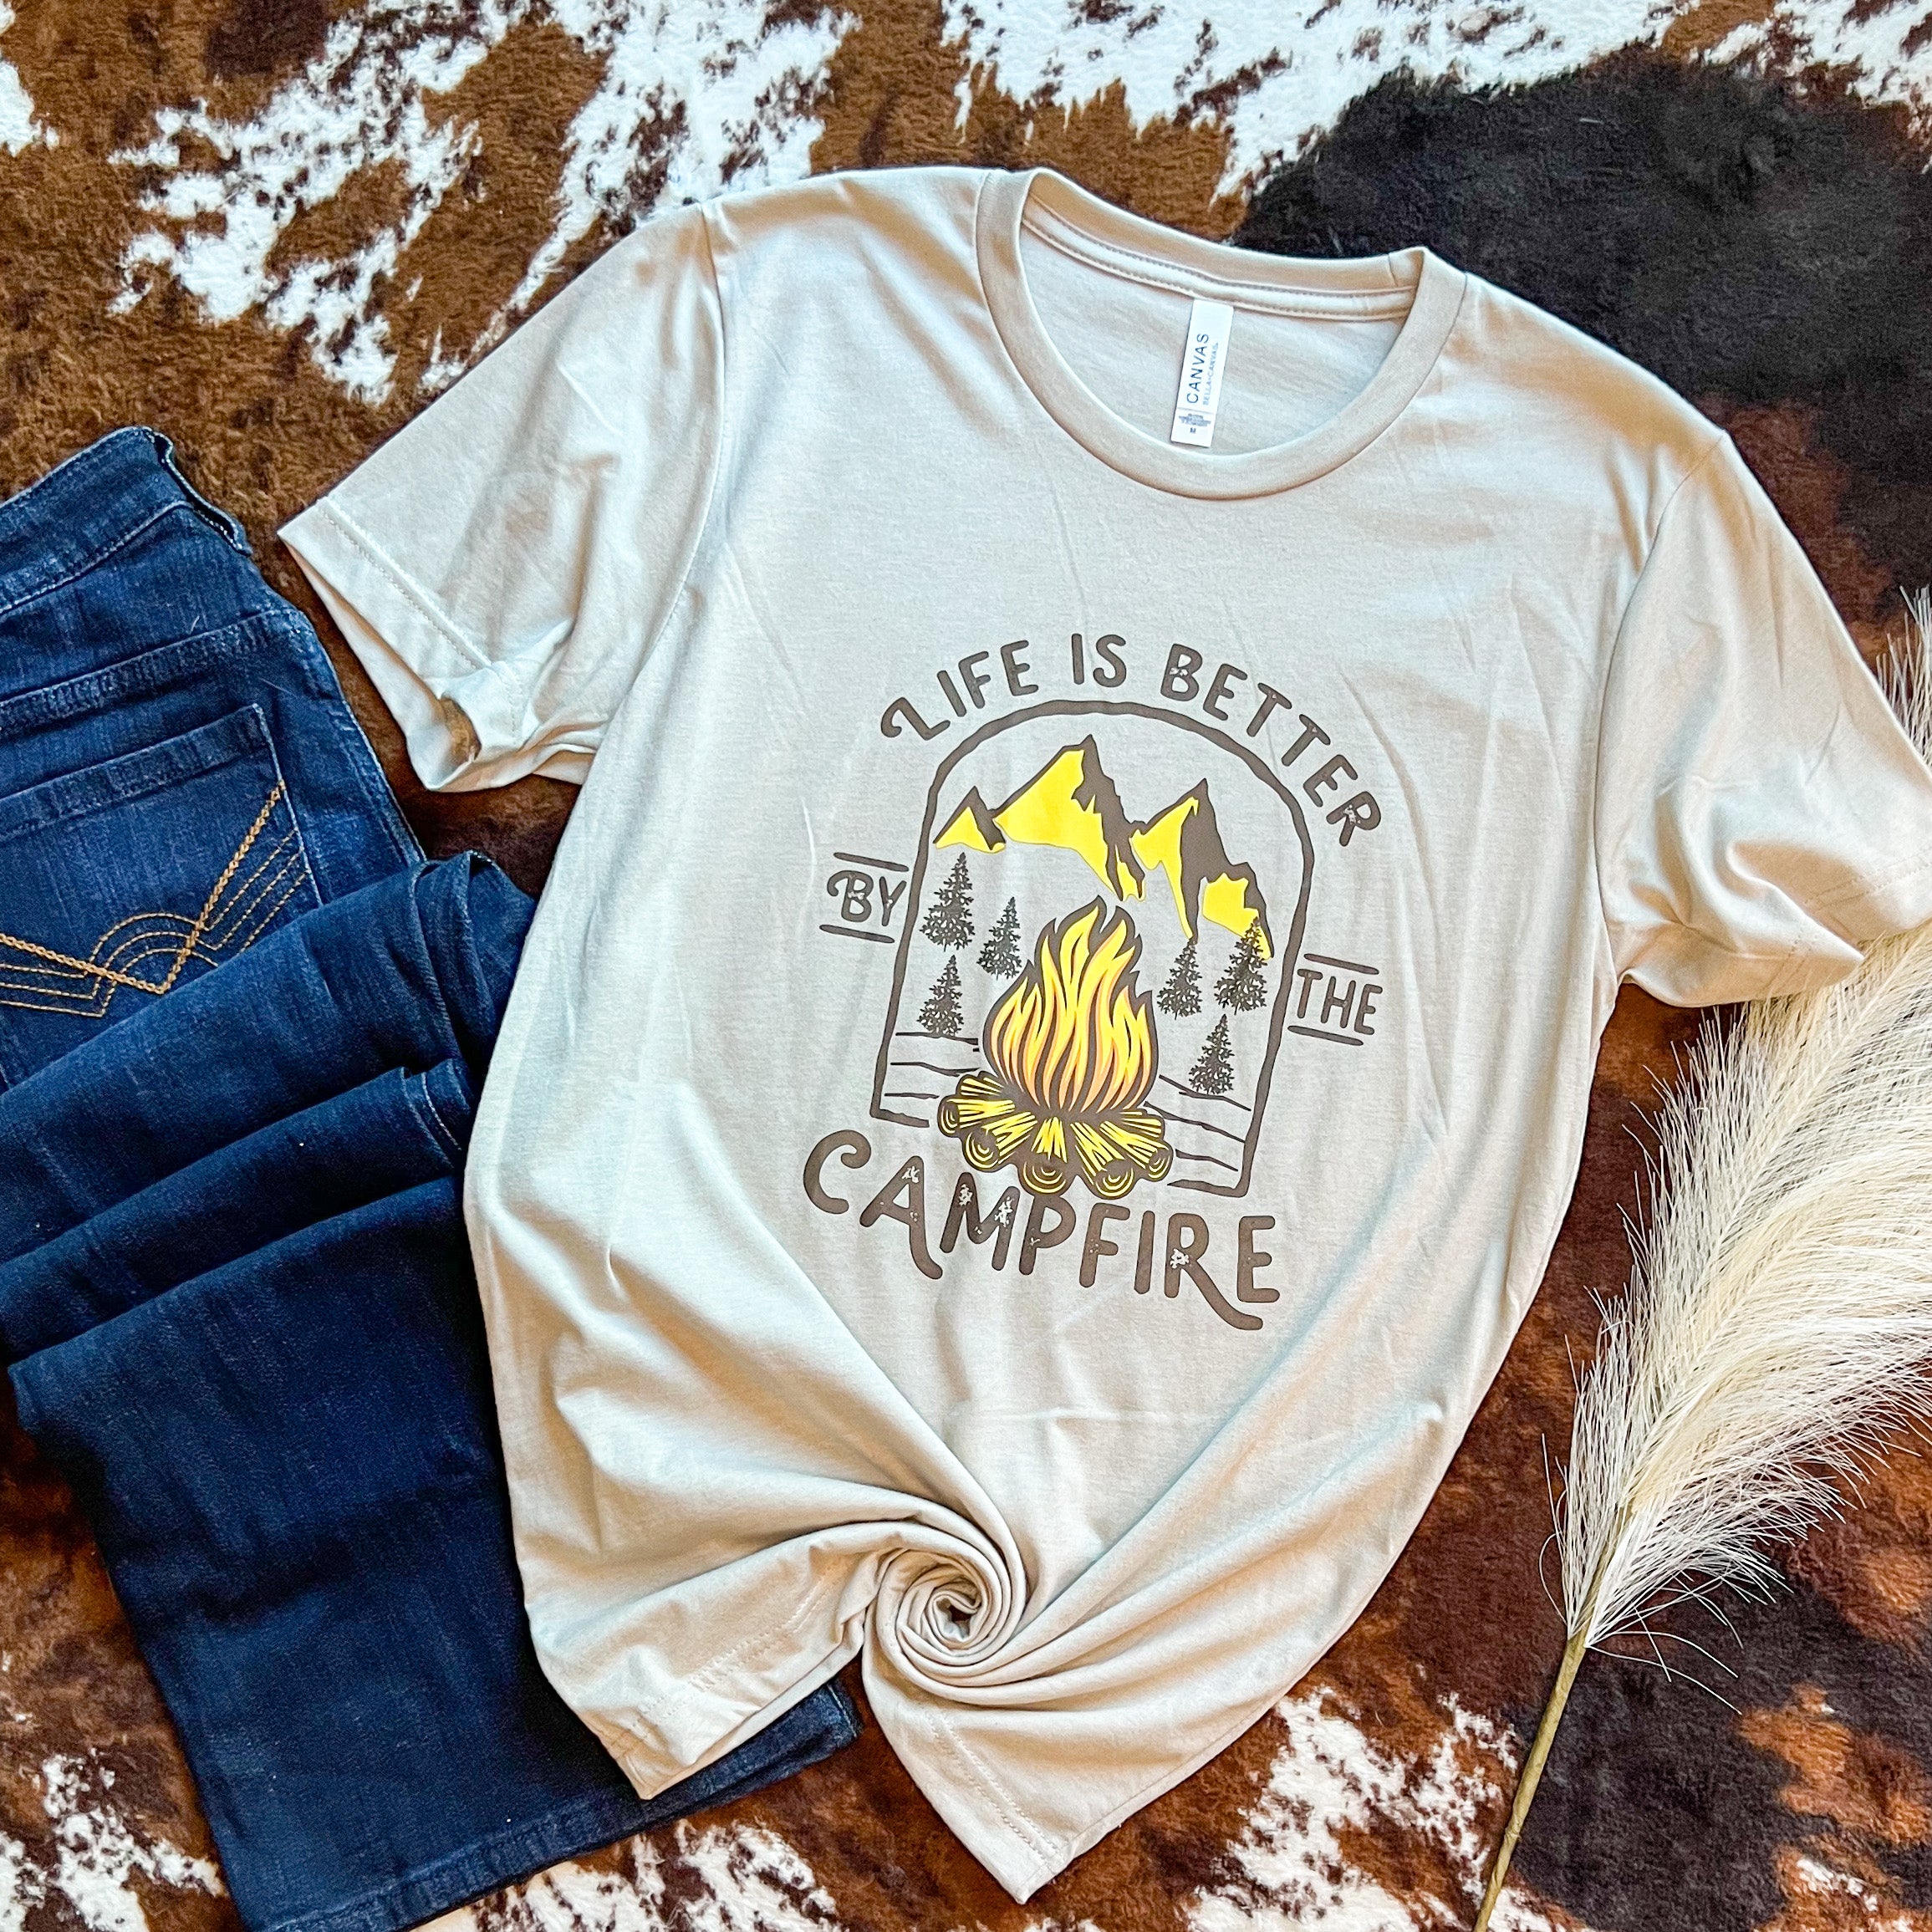 Life is Better by the Campfire (Medium)